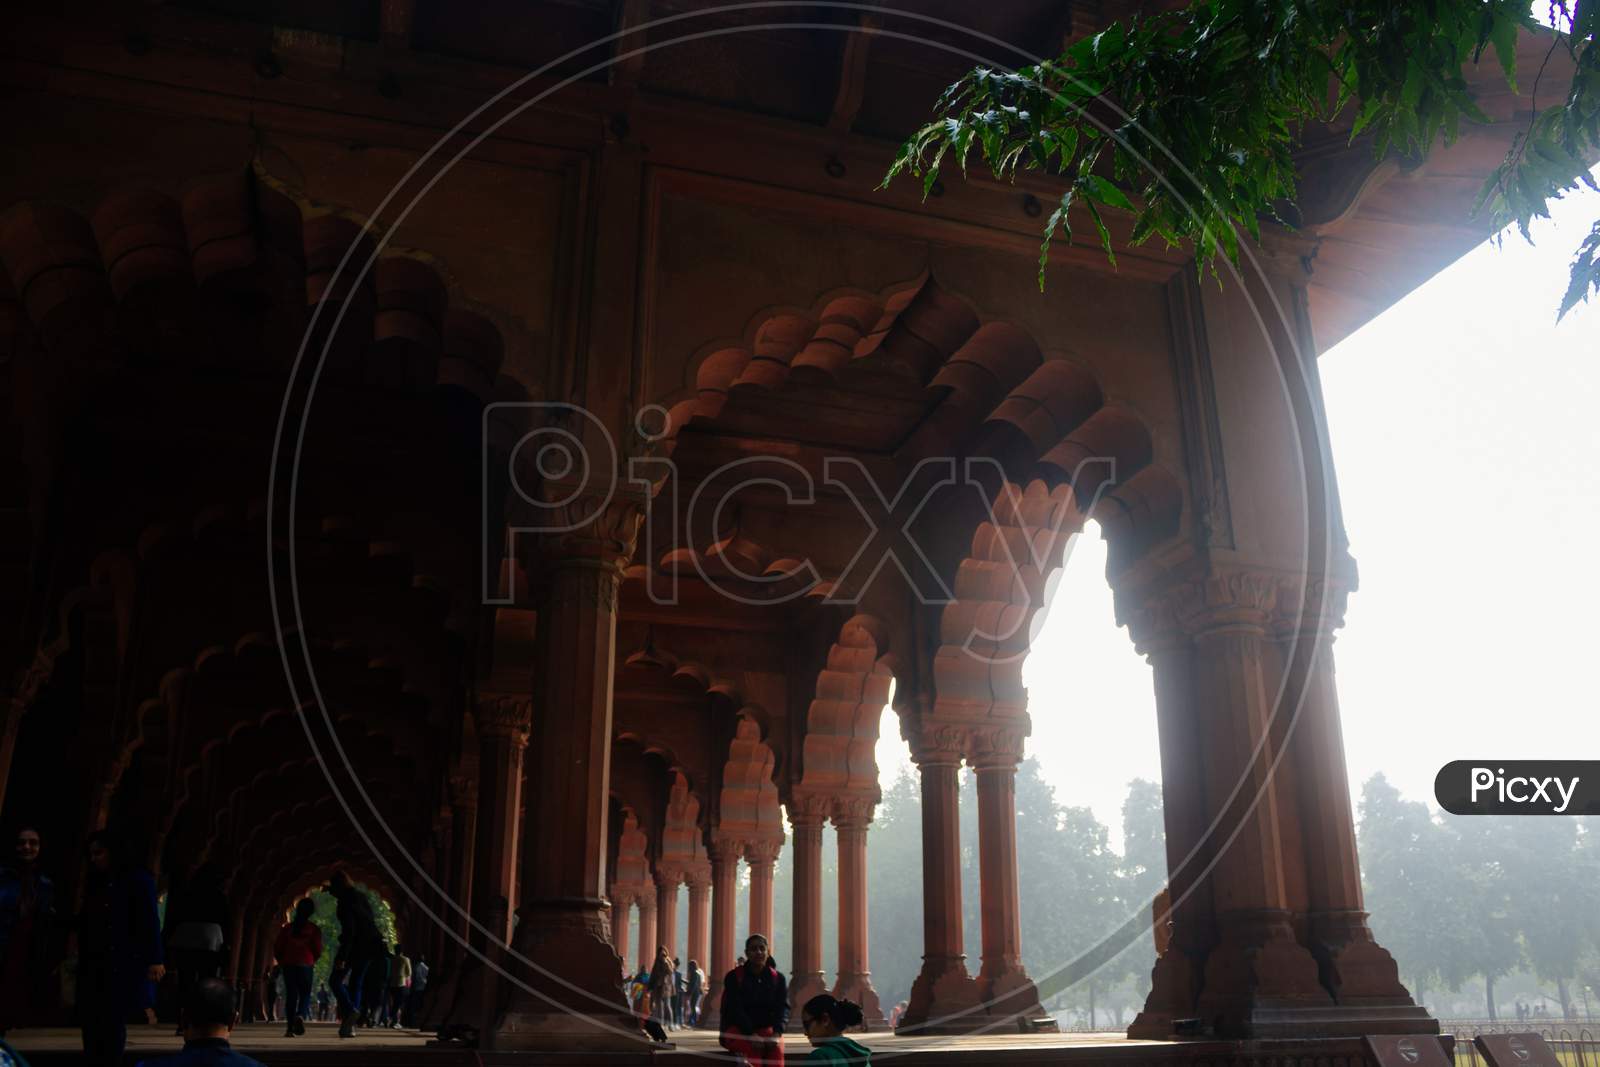 The Diwan I Aam Audience Hall, India Travel Tourism Background - Red Fort (Lal Qila) Delhi - World Heritage Site. Delhi, India